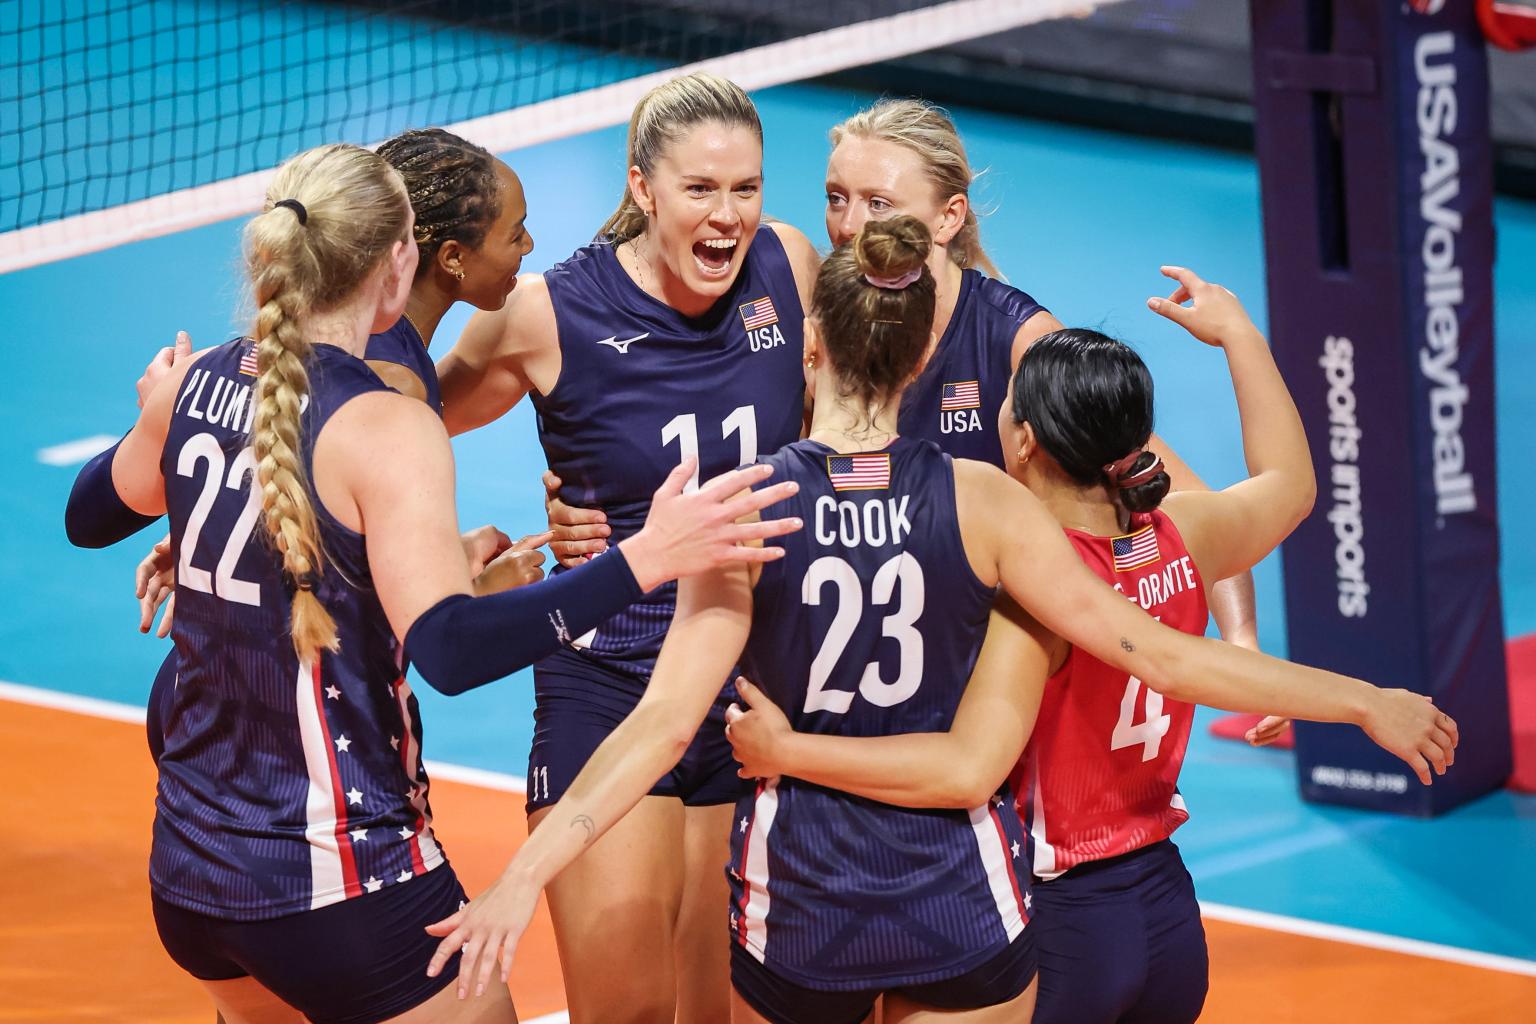 Paris Presents Deepest Women's Volleyball Field at the Biggest Stage